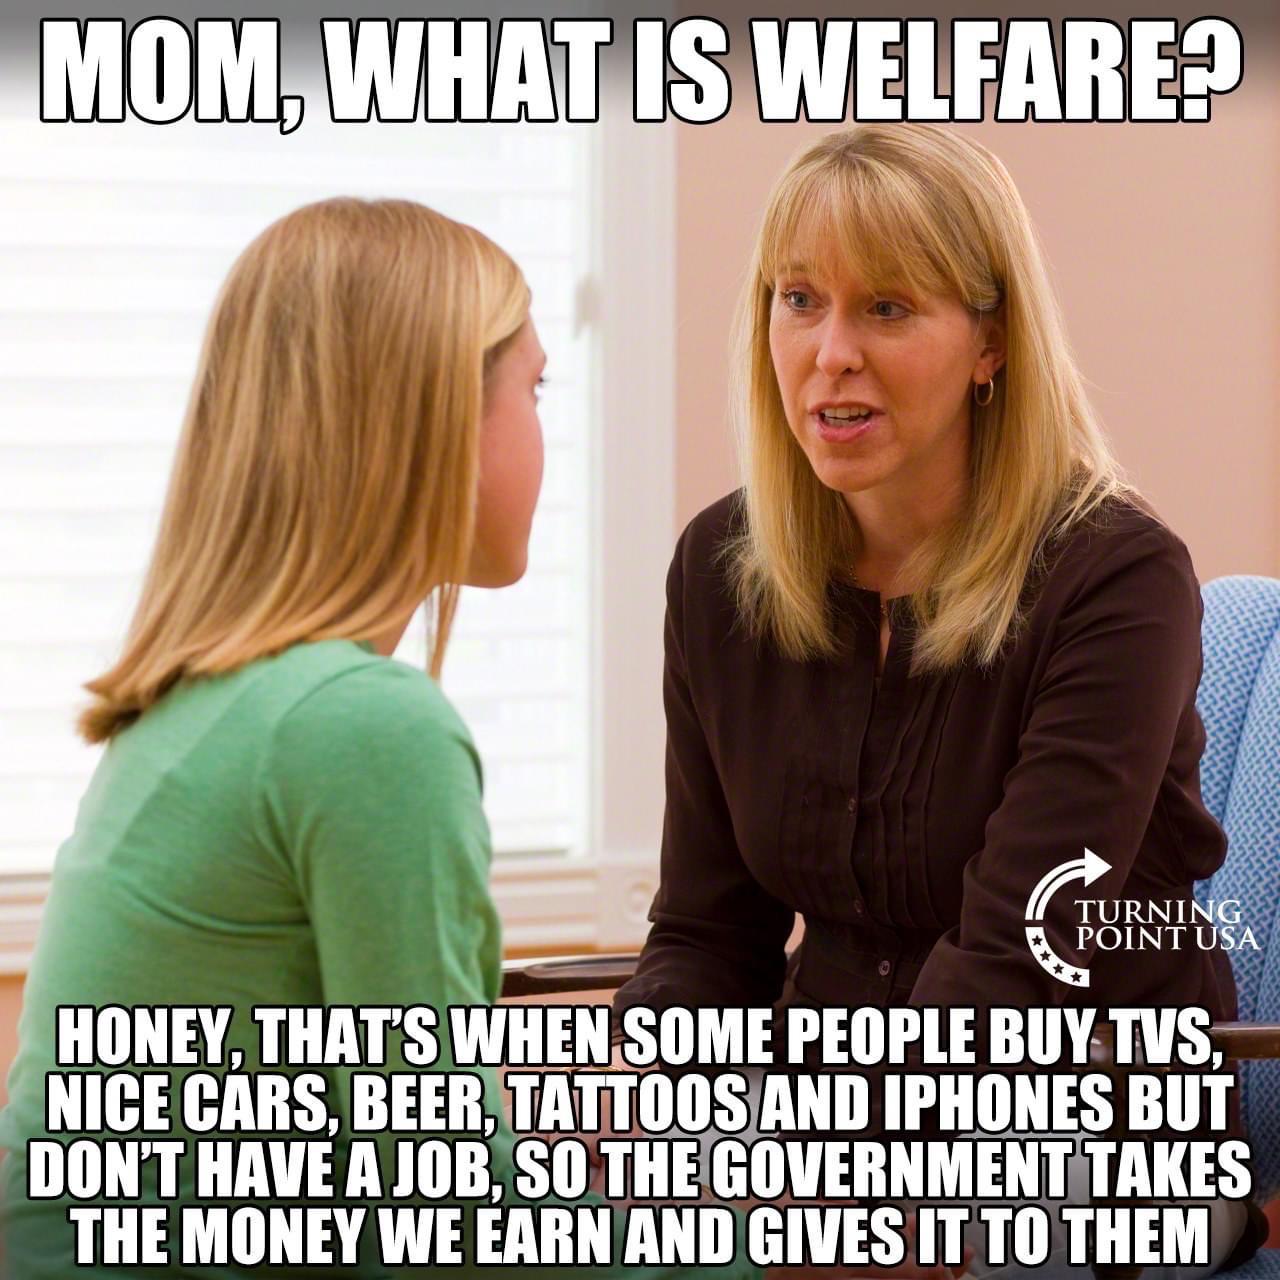 Political, Mommy, Honey boomer memes Political, Mommy, Honey text: MOM, WHAT IS WELFARE? TURNIN POINT USA HONEY, THAT'S WHENSOME PEOPLE BUY,TVS, NICE CARS, BEER,ITÅTTOOS AND IPHONES BUT DON'T HAVE A JOB, SO THVGOVERNMENTTTAKES THE MONEY WE EARN AND GIVES IT TO THEM 